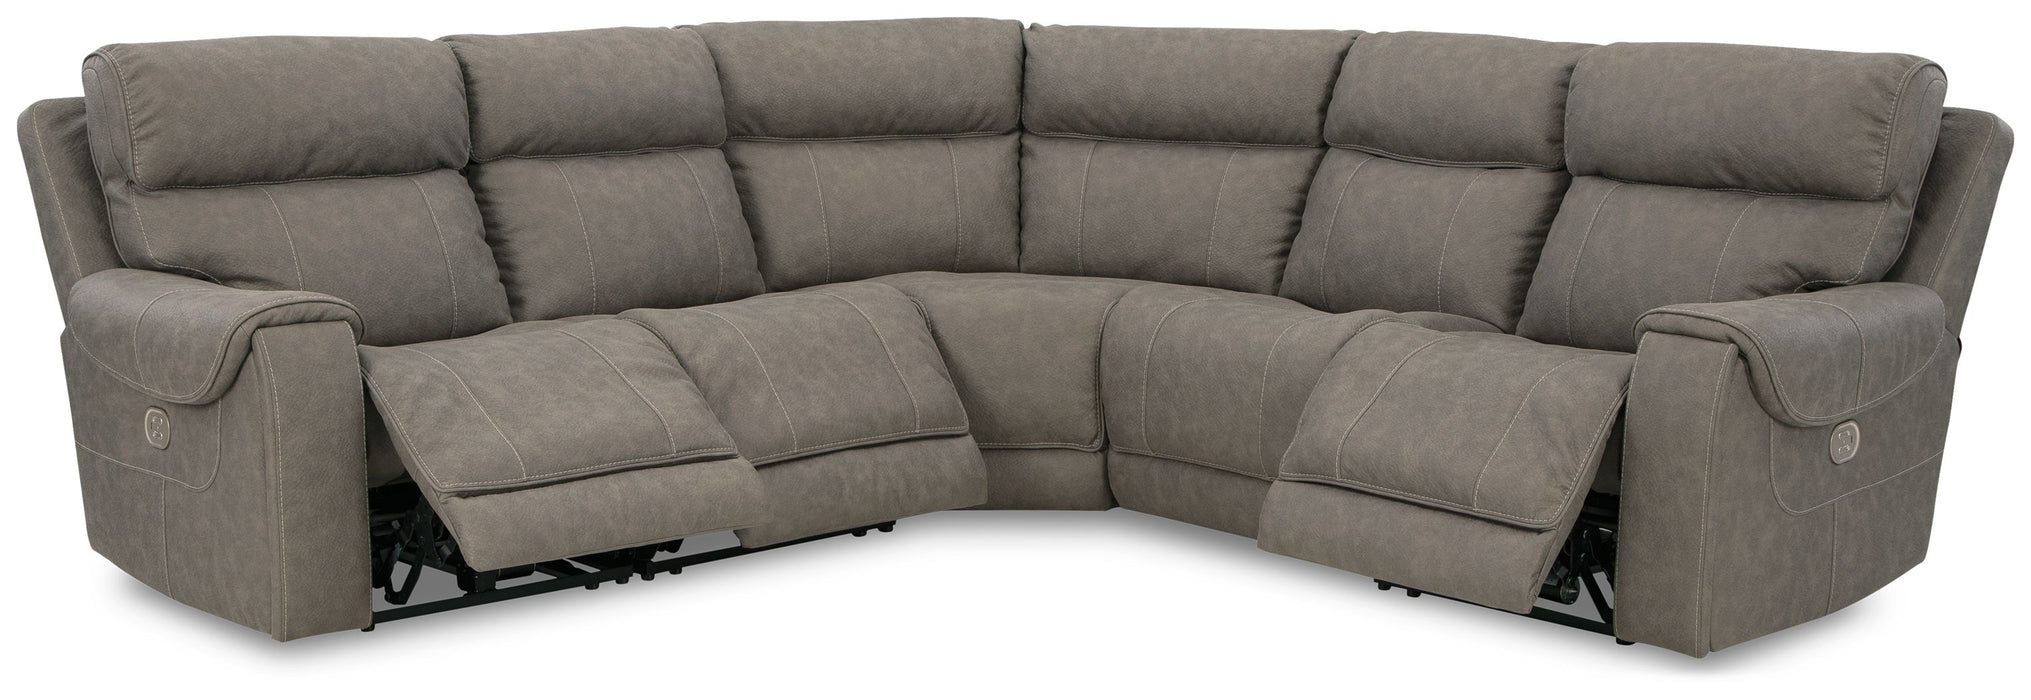 Starbot - Sectional